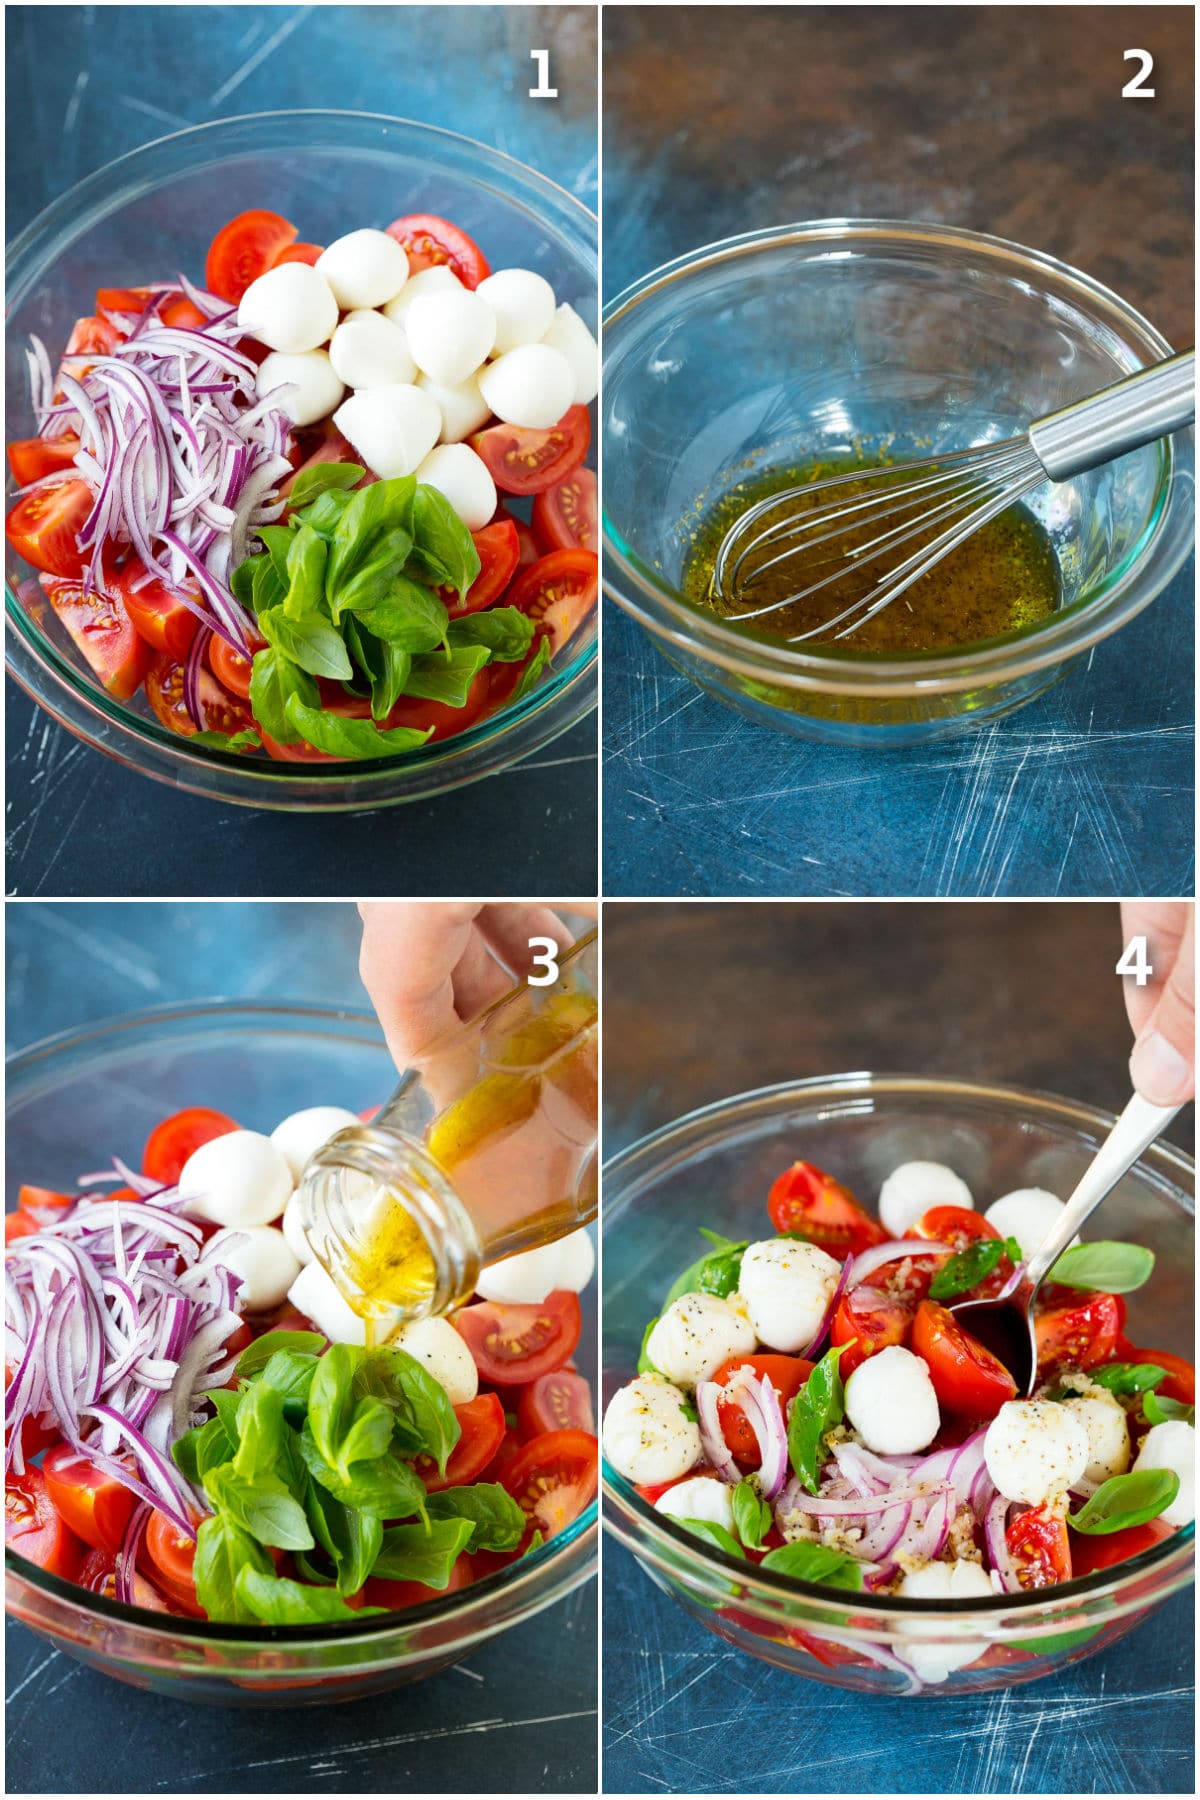 Step by step shots showing how to prepare tomato salad.